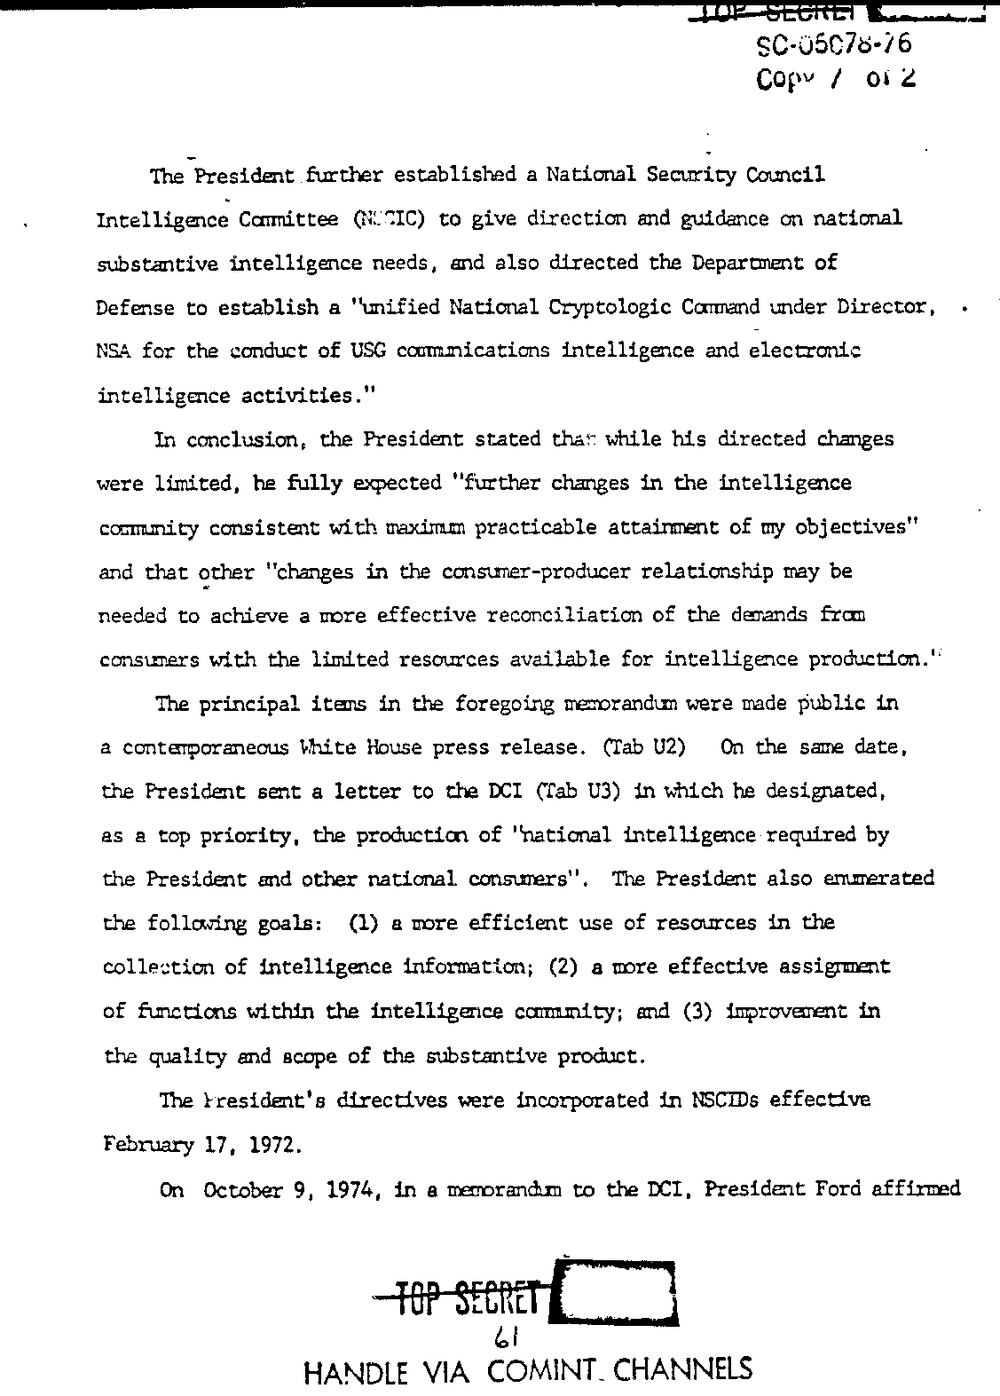 Page 69 from Report on Inquiry Into CIA Related Electronic Surveillance Activities